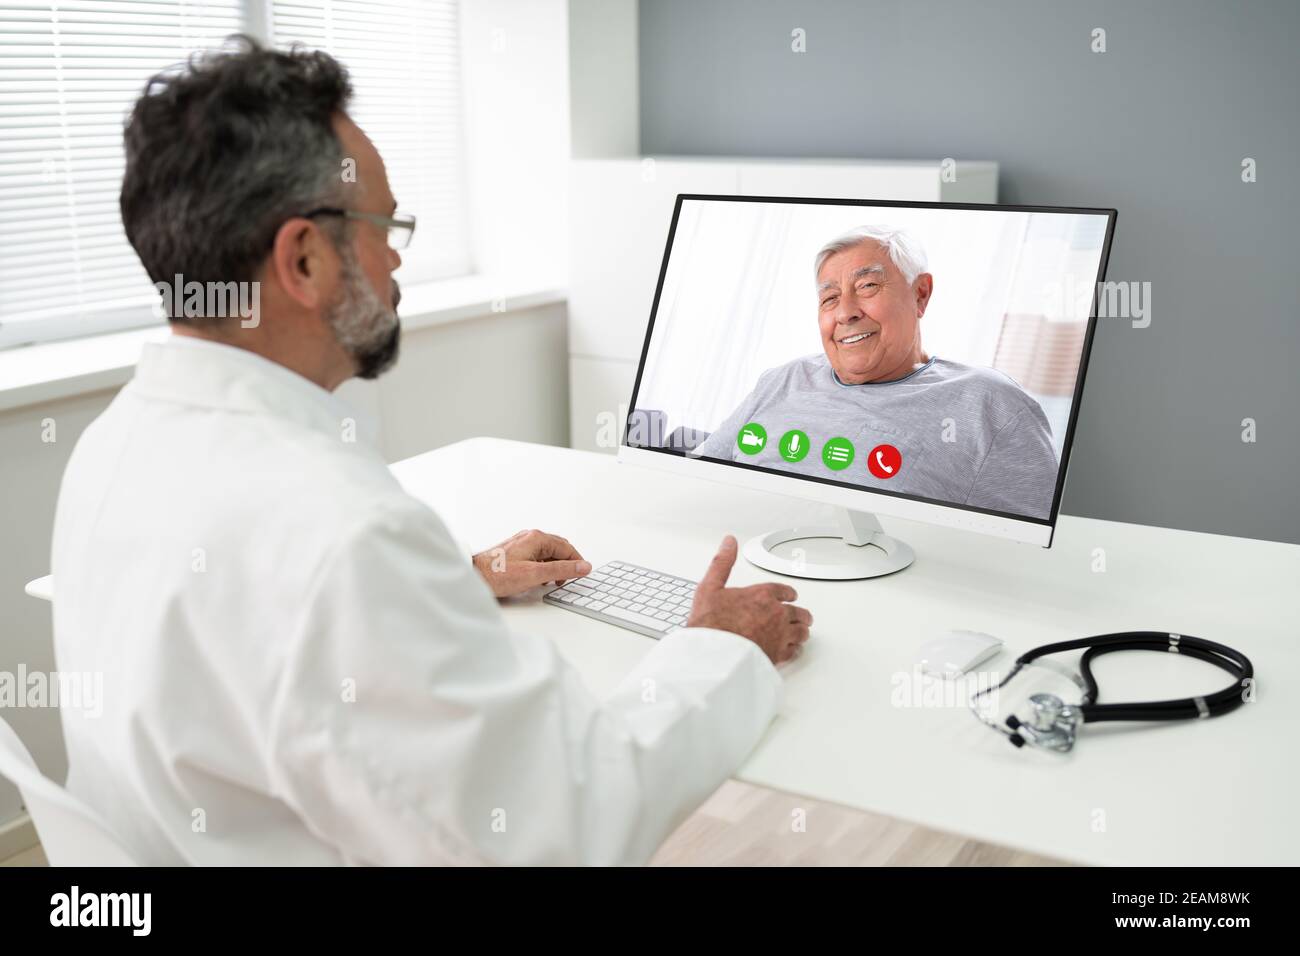 Doctor Talking With Patient Online In Video Call Stock Photo